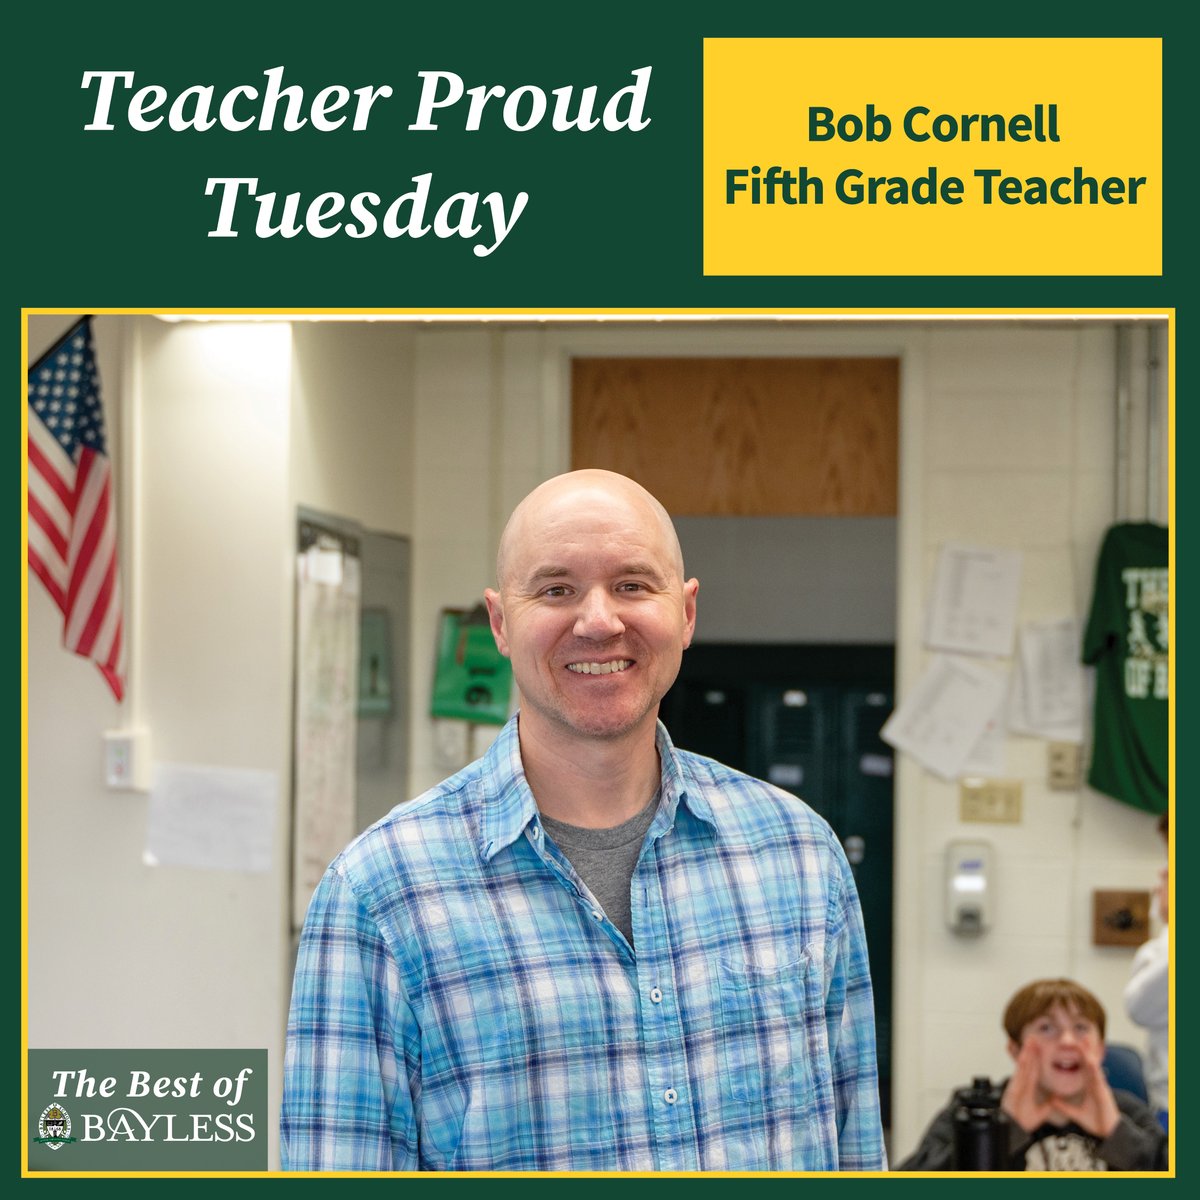 This #TeacherProudTuesday is for 5th teacher Bob Cornell!

Mr. Cornell recognized the need for additional after-school activities for younger students — and created the Broncho Hootenanny! The Broncho Hootenanny is a fun sing-along time for K-2 students. #BringTheStampede